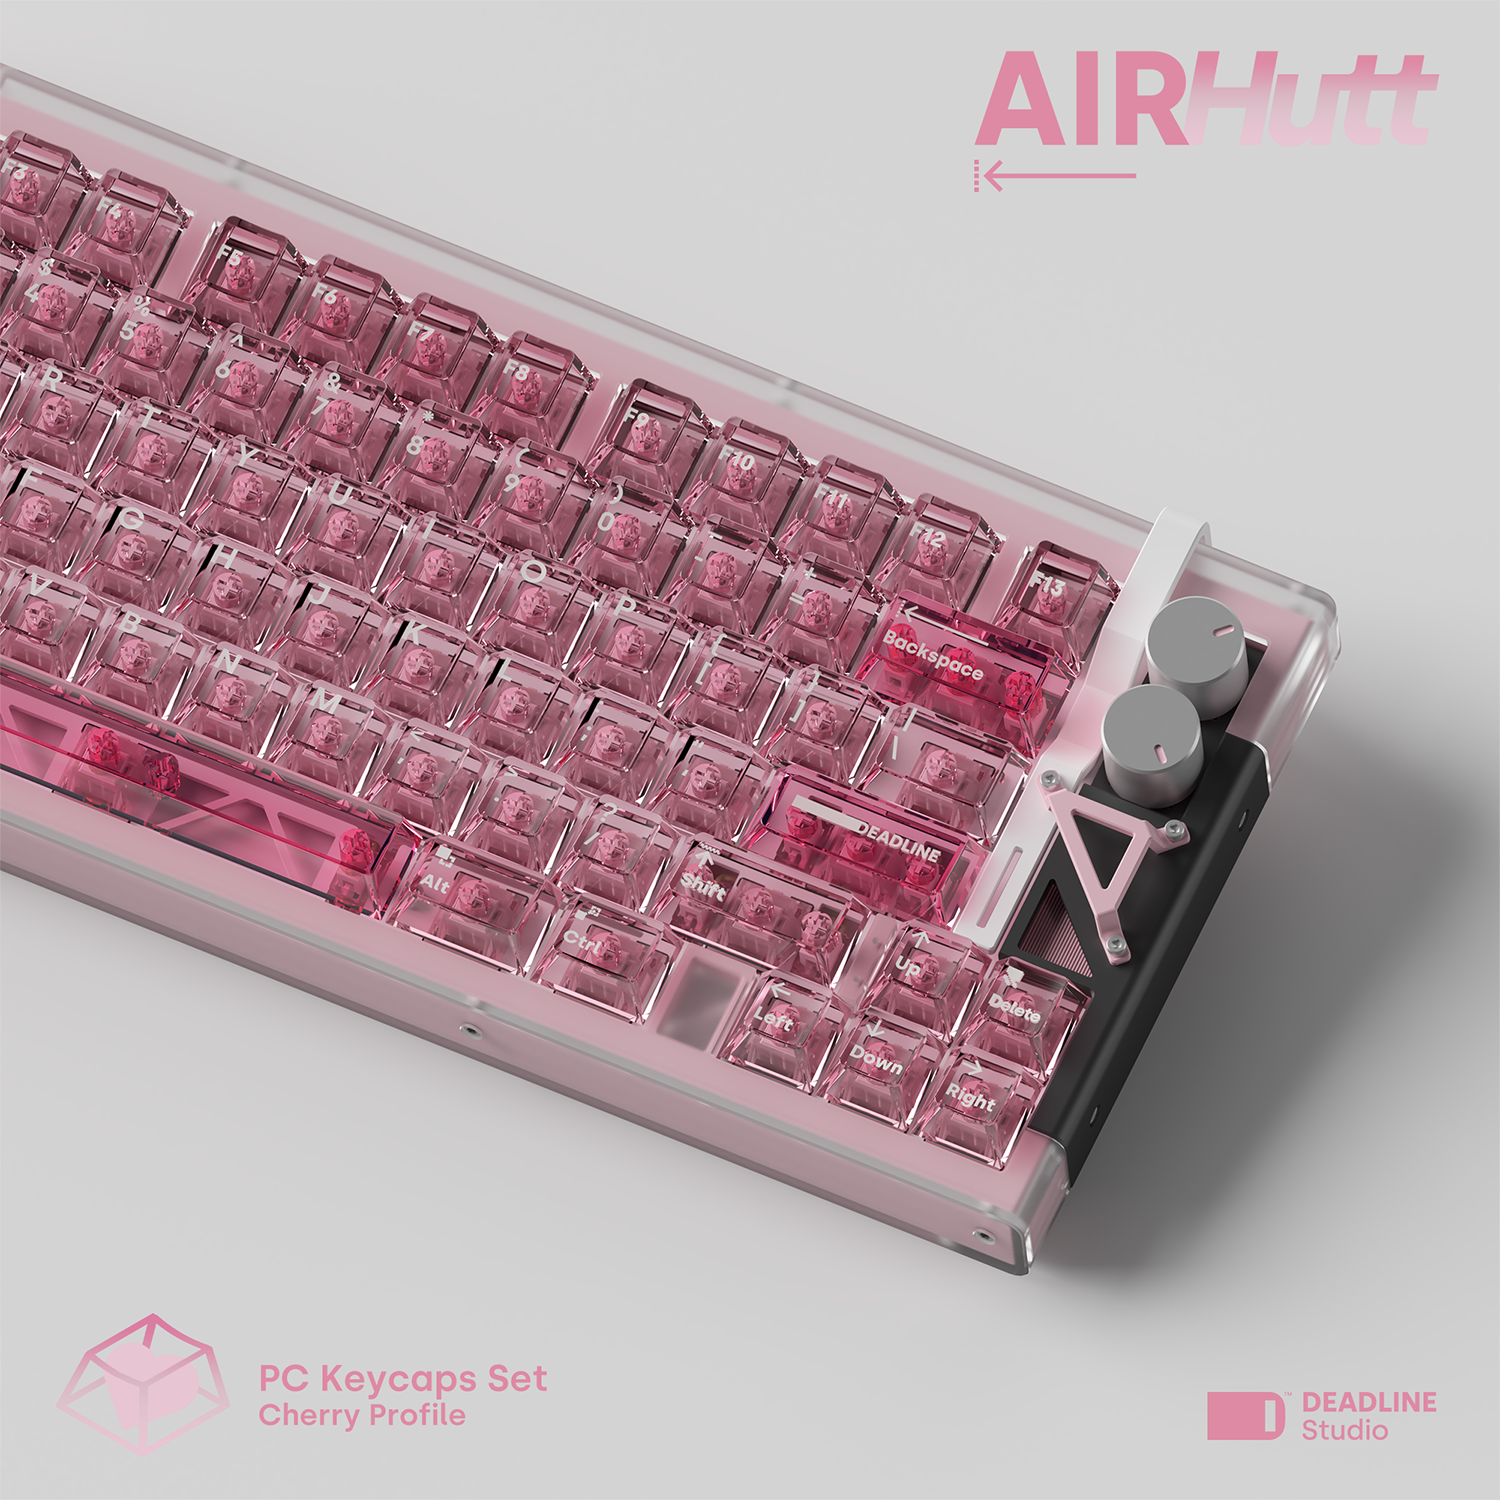 AIR-HUTT Keycaps Group-Buy